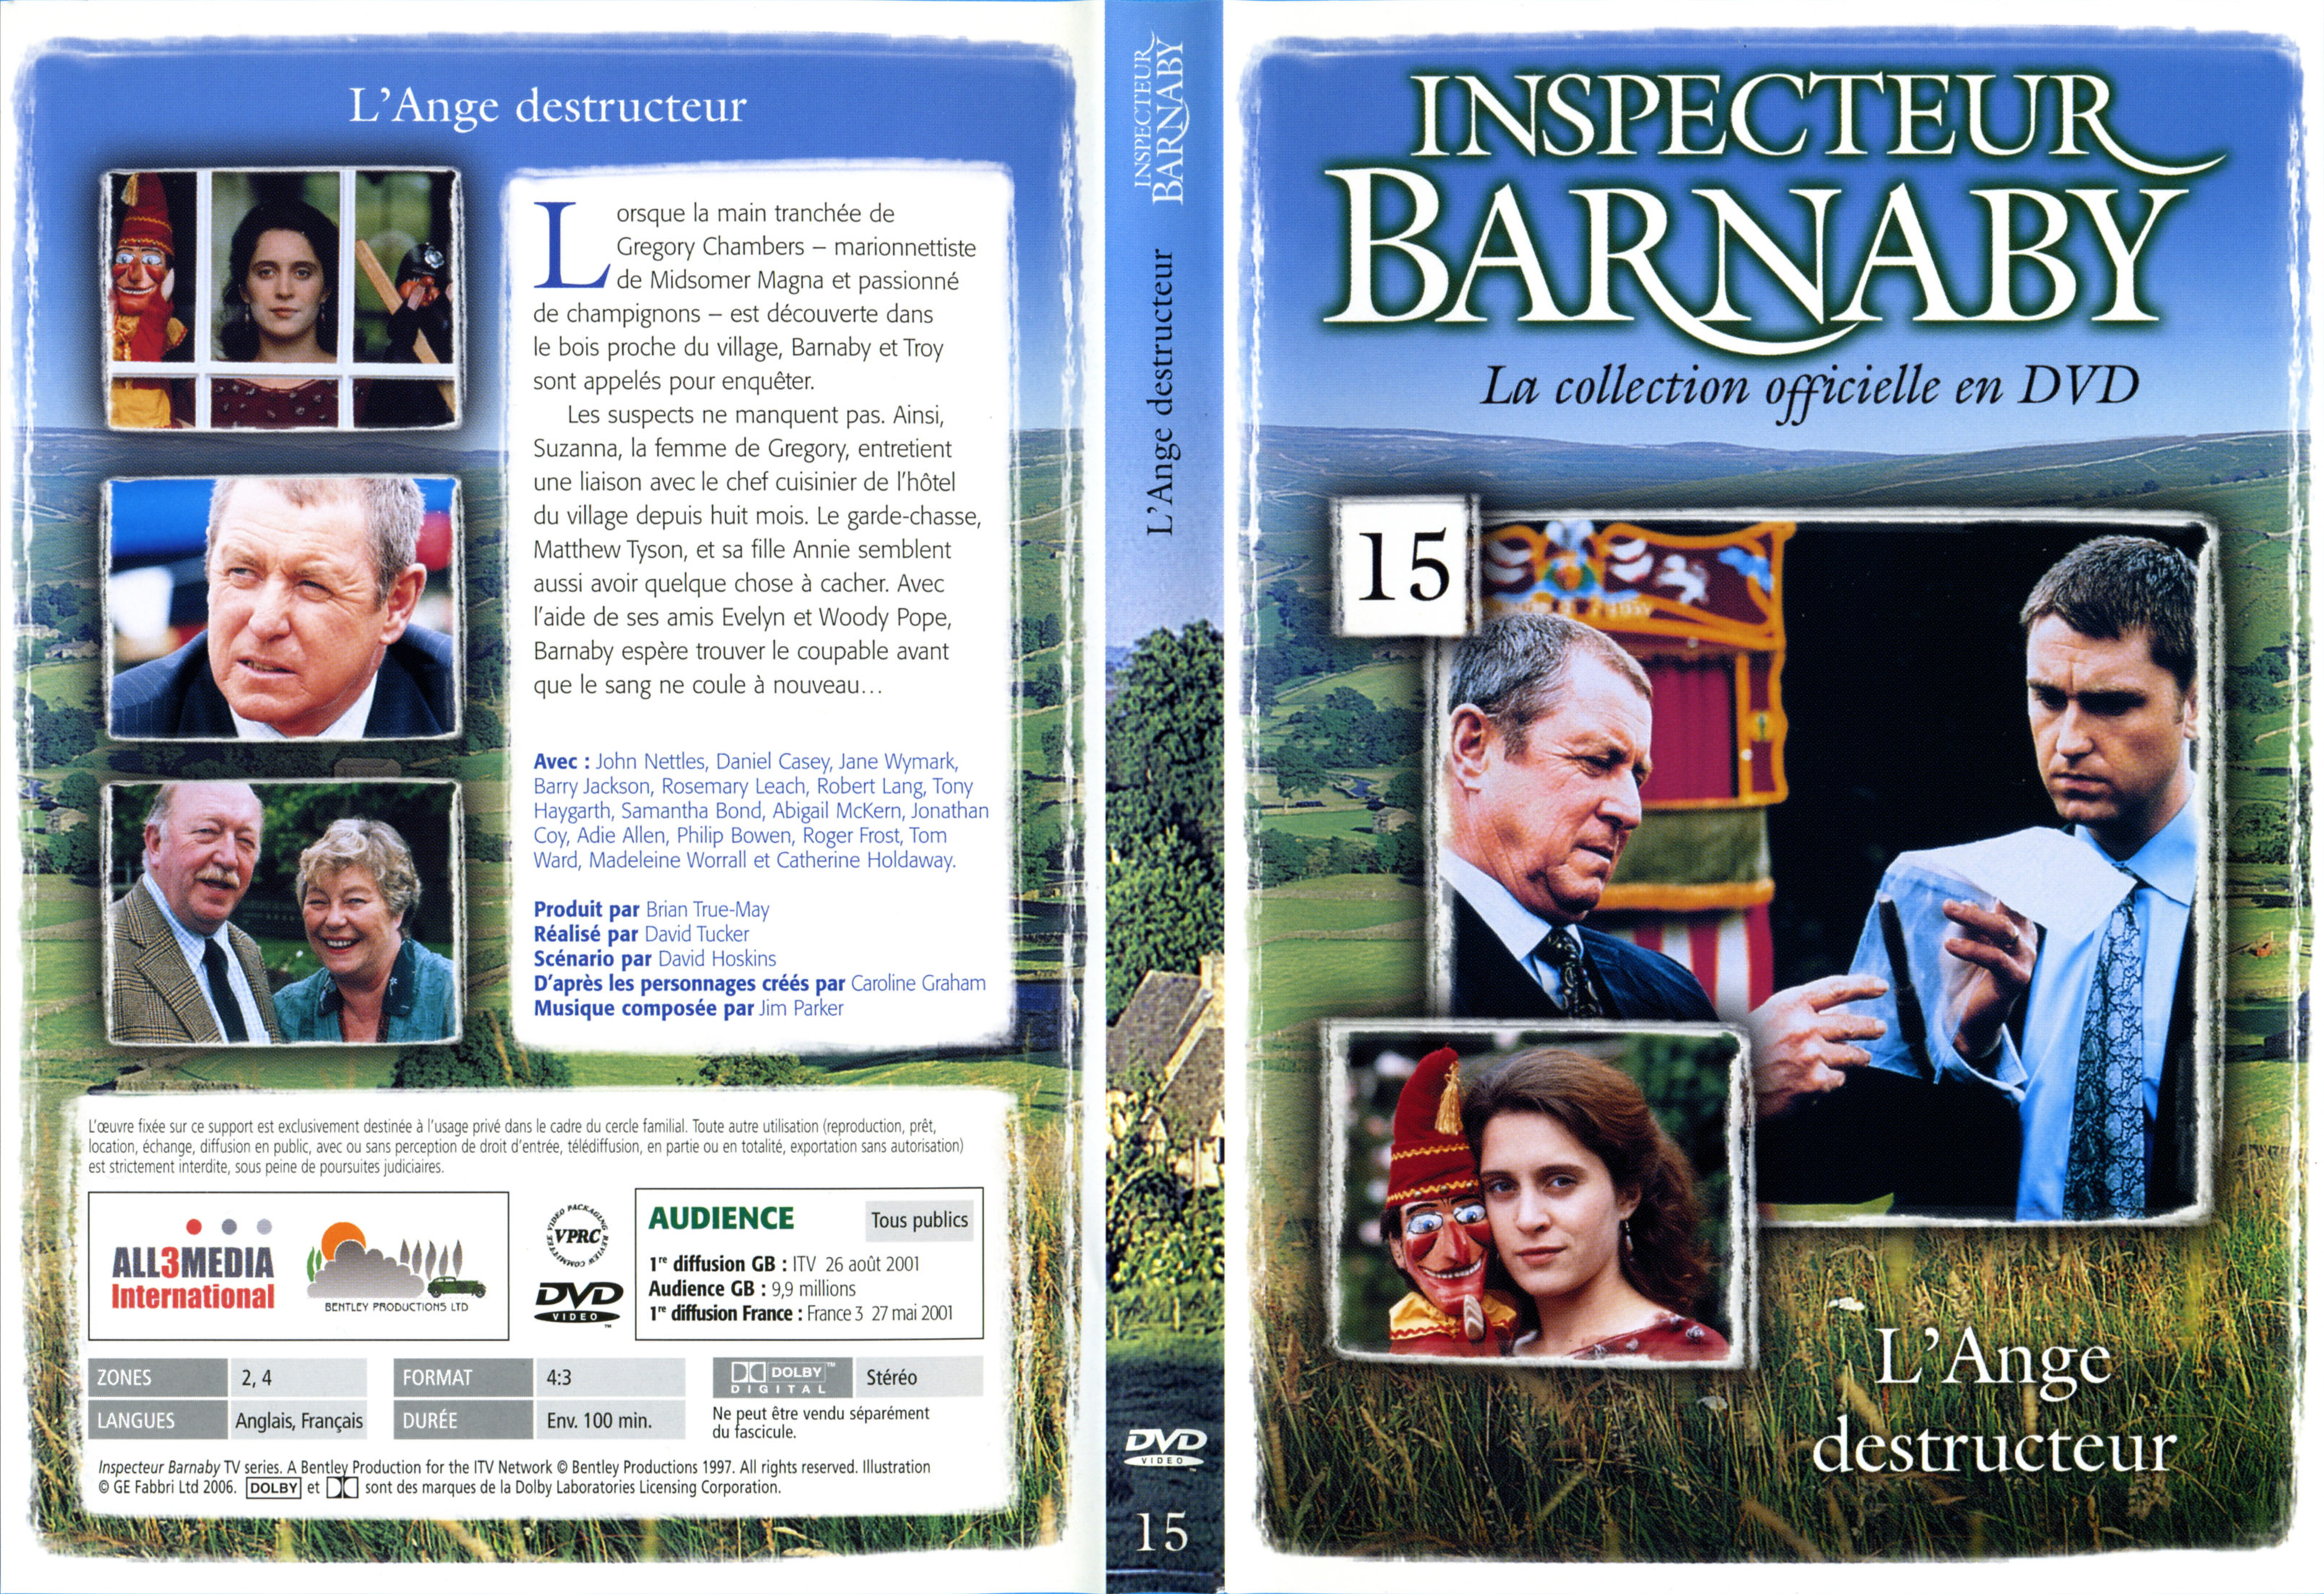 Jaquette DVD Barnaby vol 15 - L